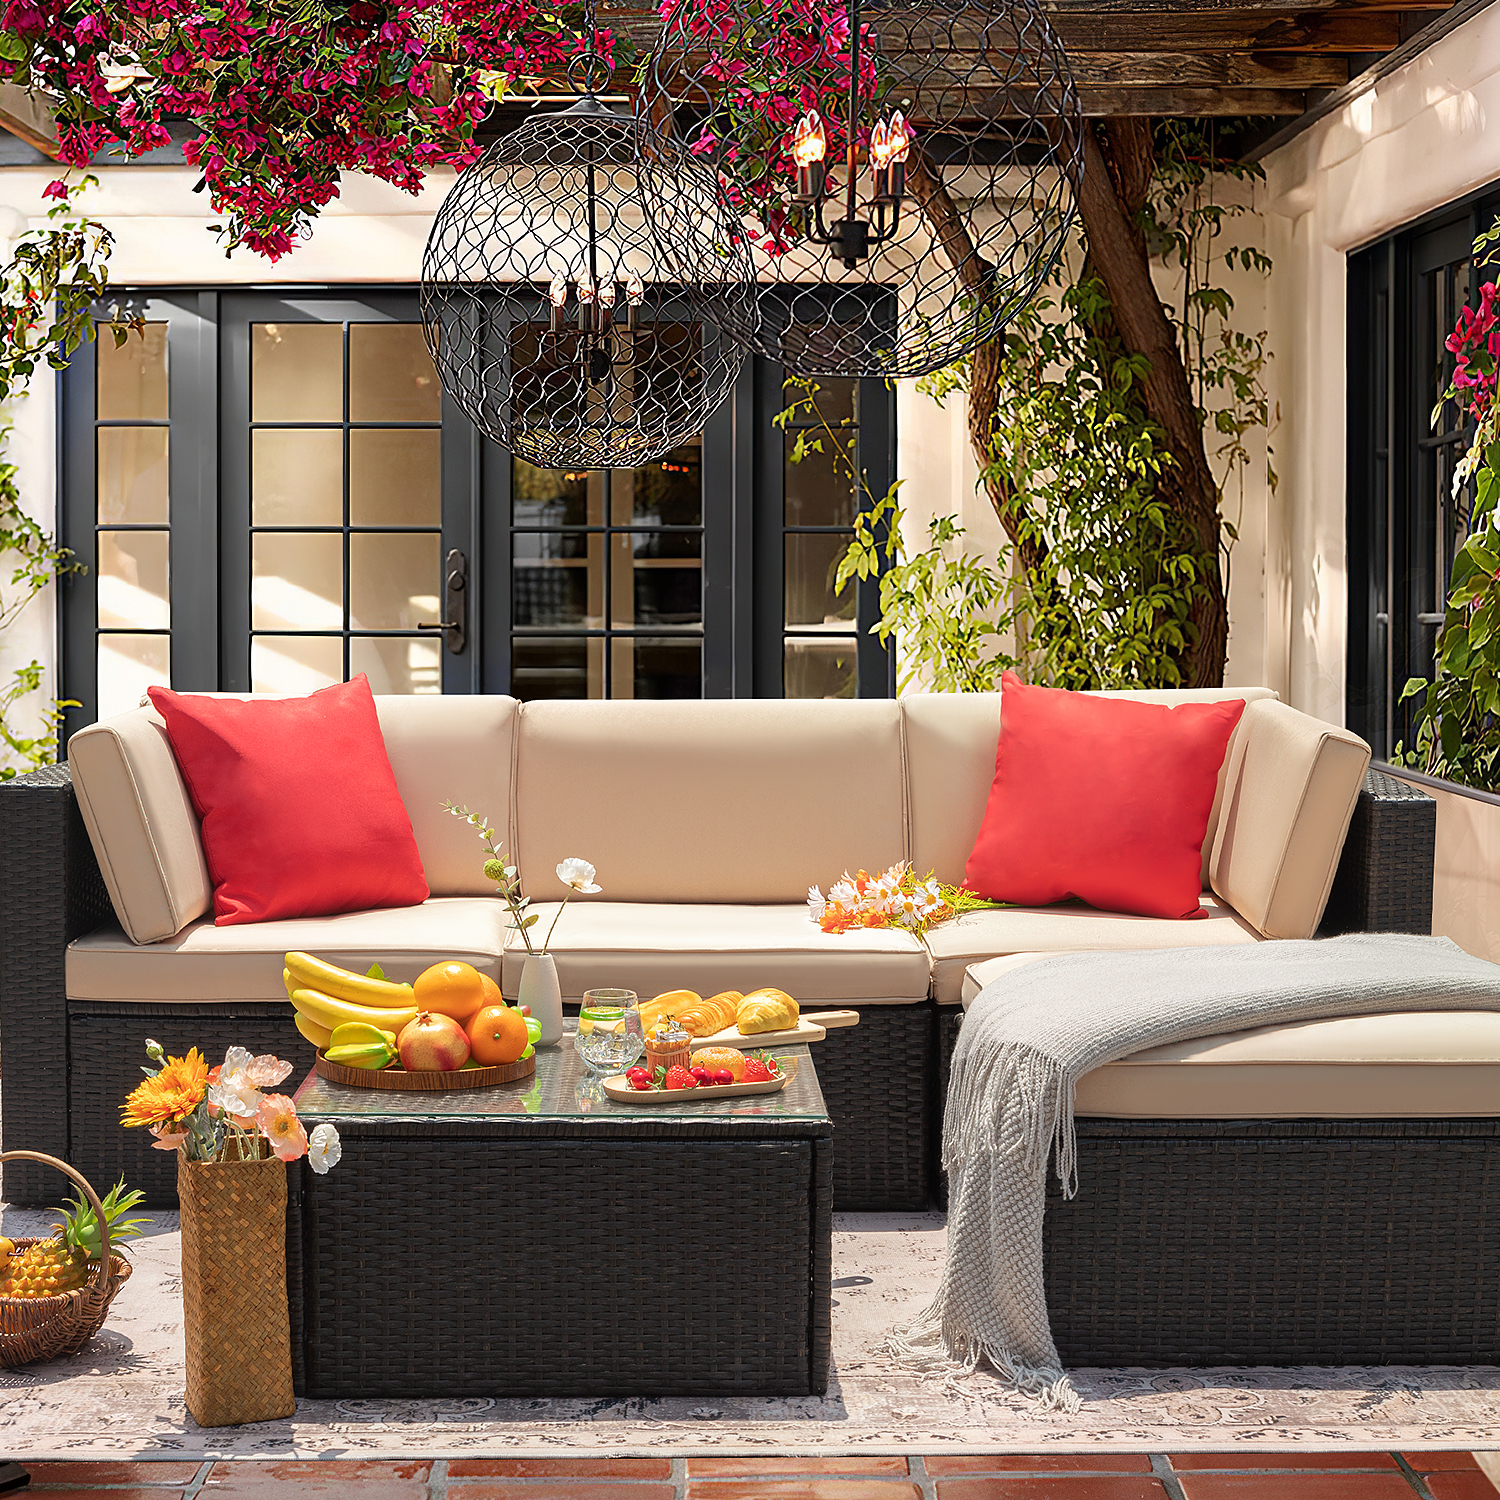 LACOO 5 Pieces Patio Sectional Set PE Rattan Outdoor All-Weather Wicker Conversation Set with Table, Beige - image 1 of 8